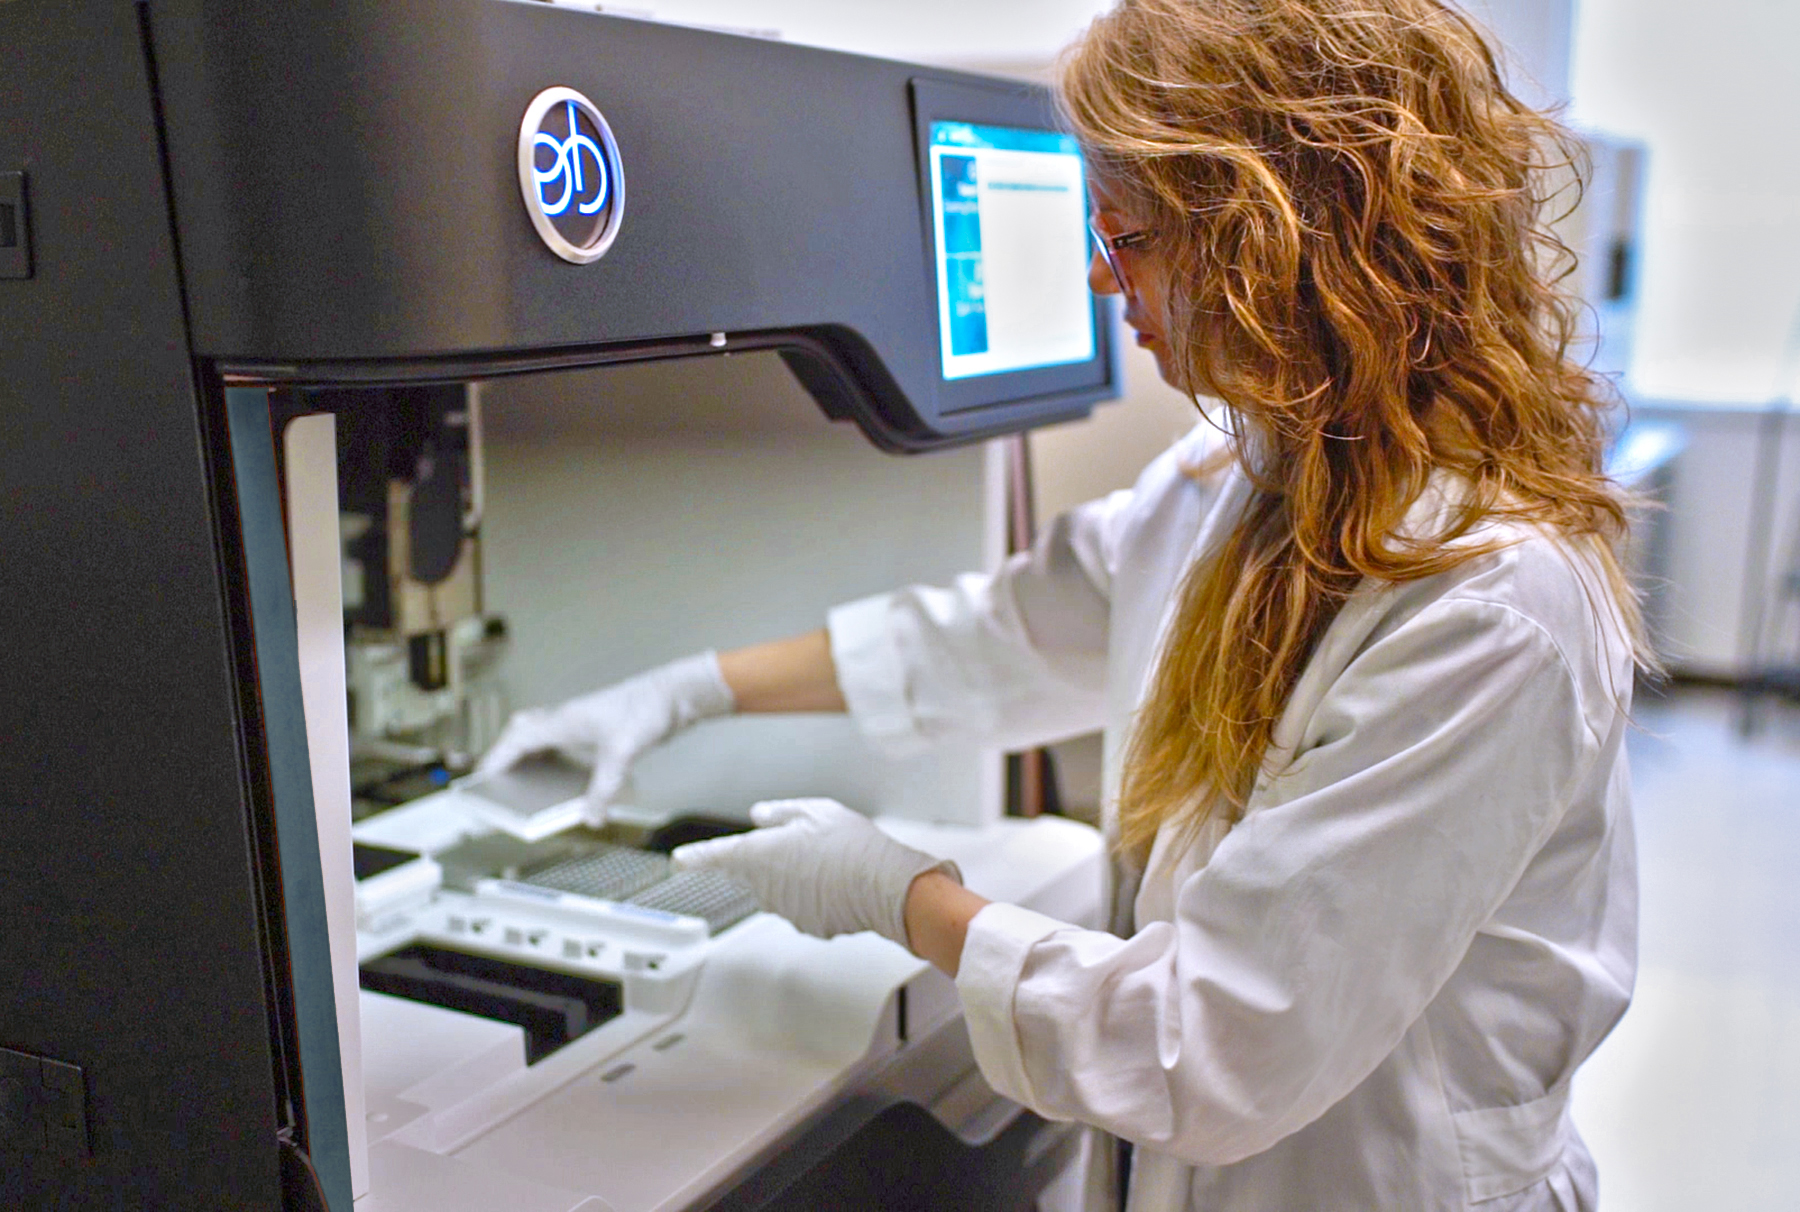 A young woman in a lab coat and gloves places a small tray of biosamples in a machine for DNA analysis.